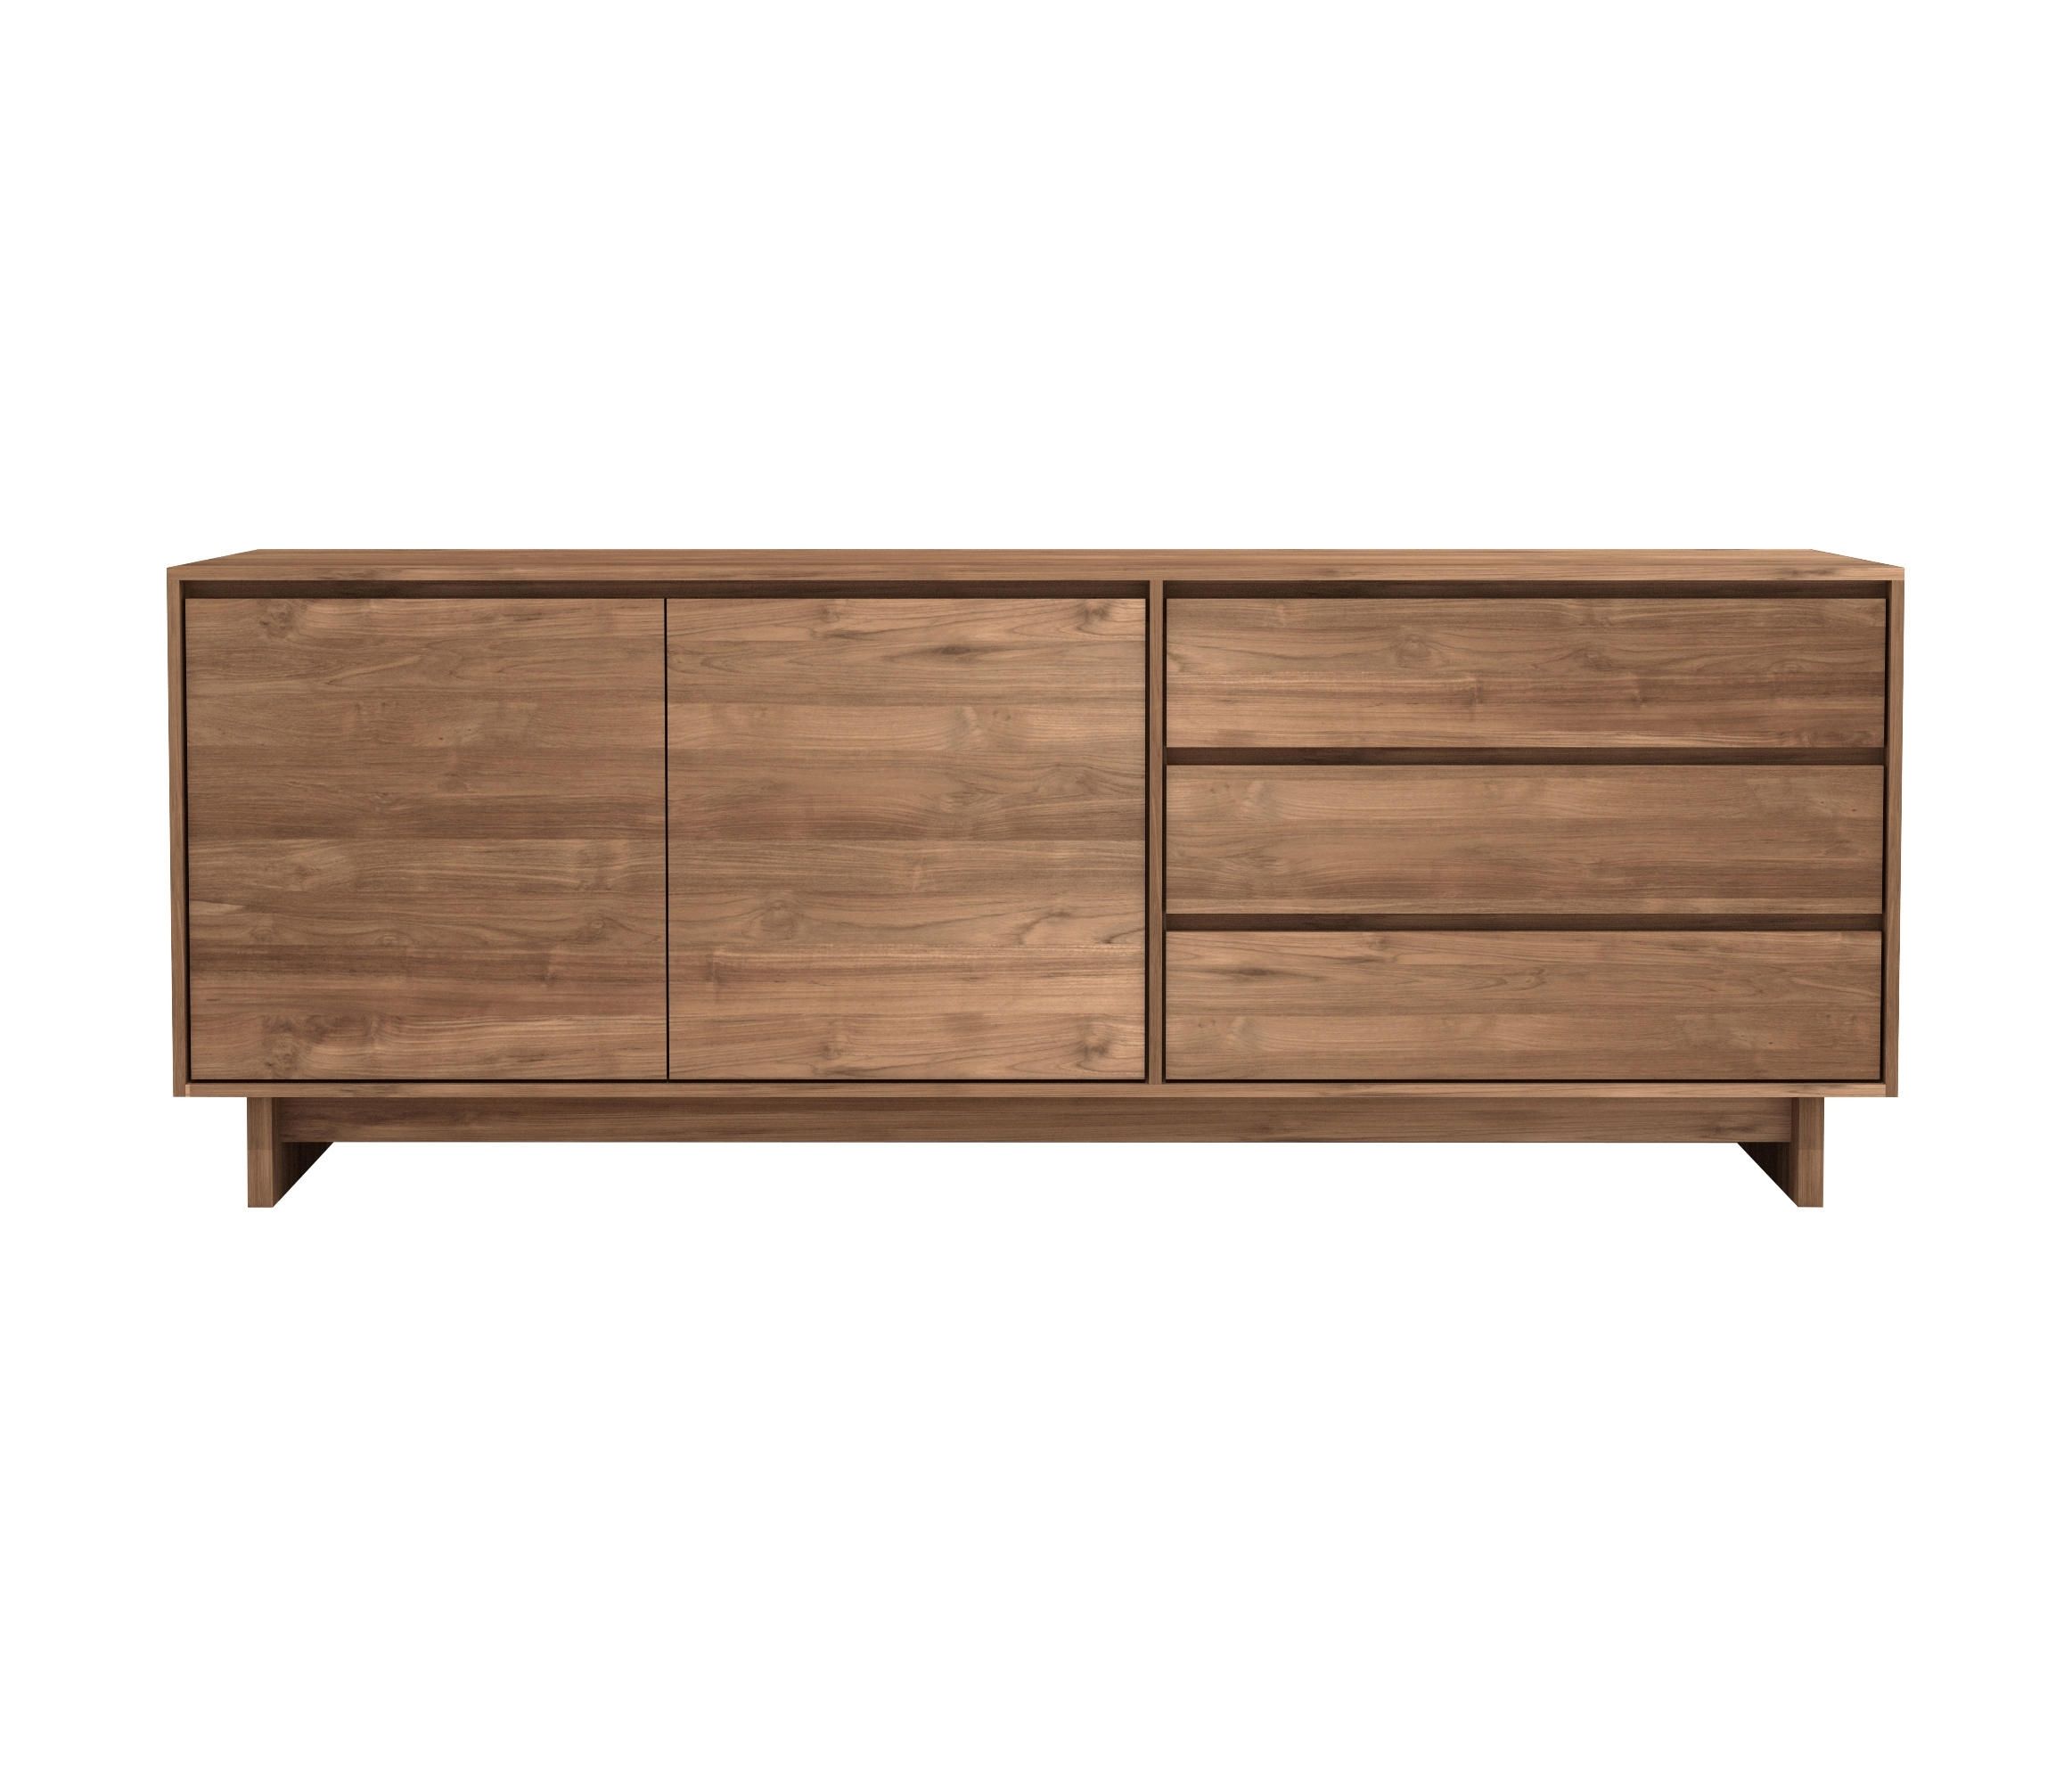 Teak Wave Sideboard – Sideboards From Ethnicraft | Architonic Pertaining To Calhoun Sideboards (View 6 of 30)